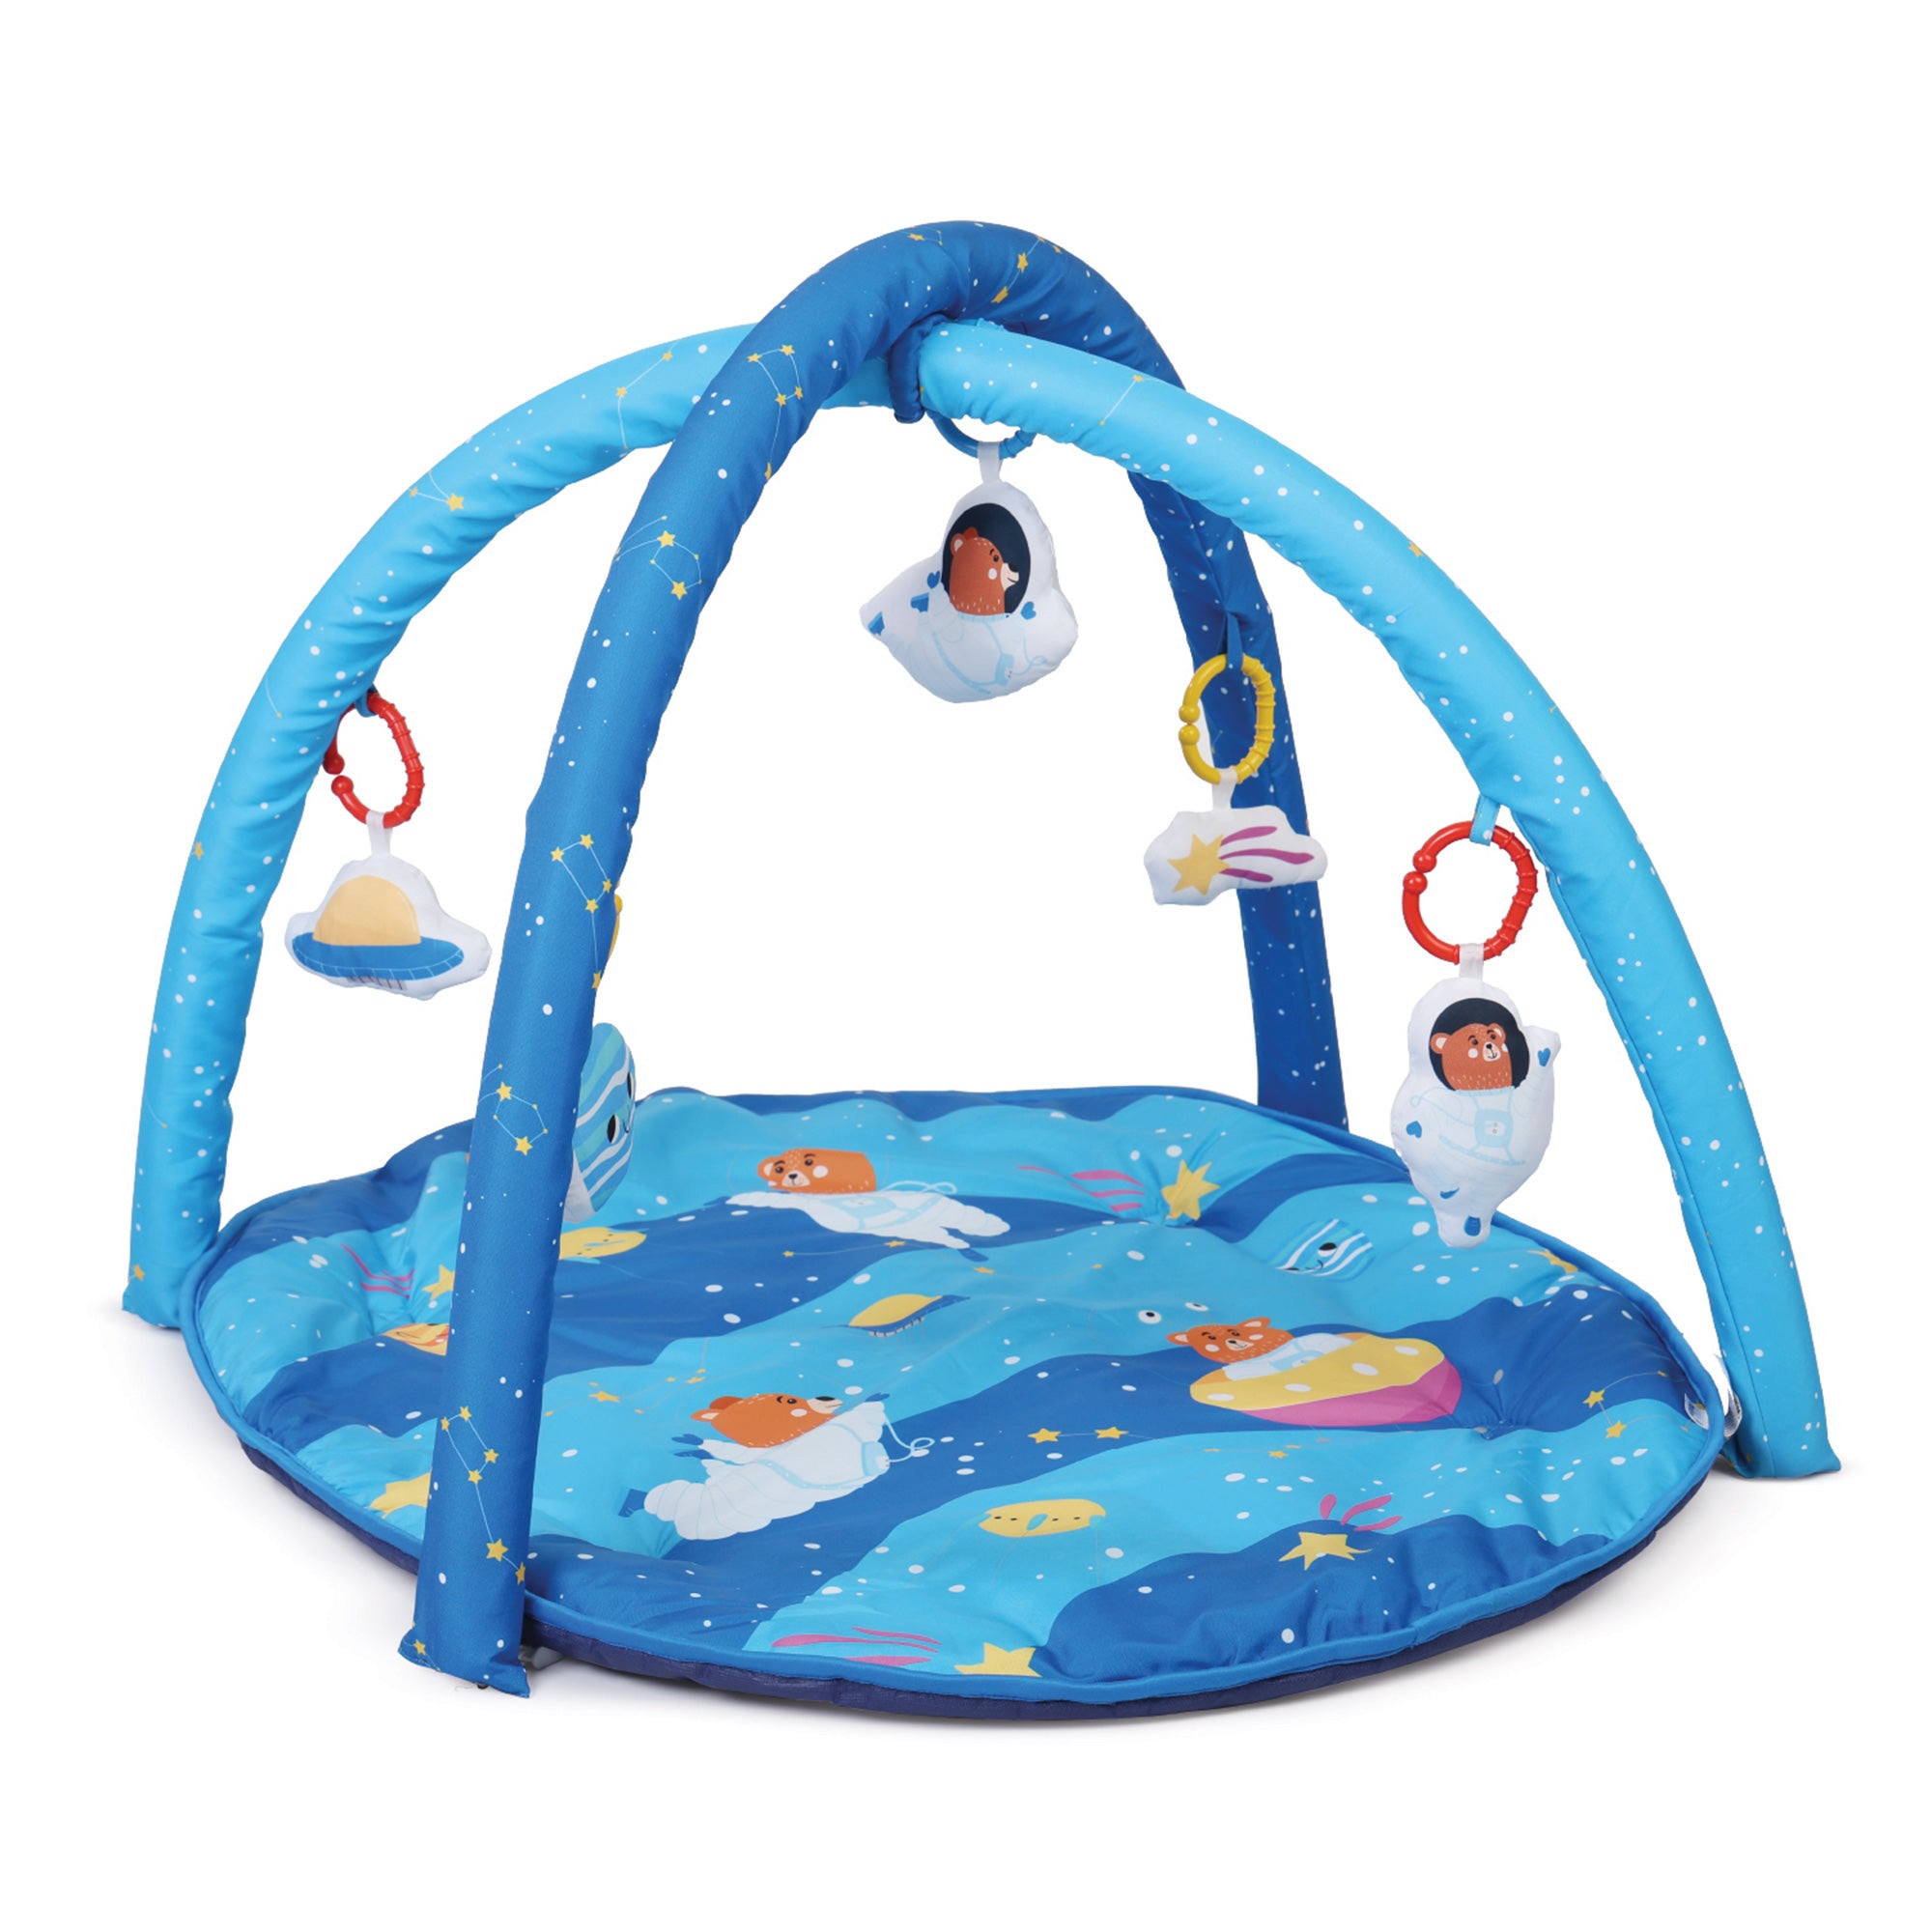 Nuluv Playgym - Space Birth to 12 Months Multicolor